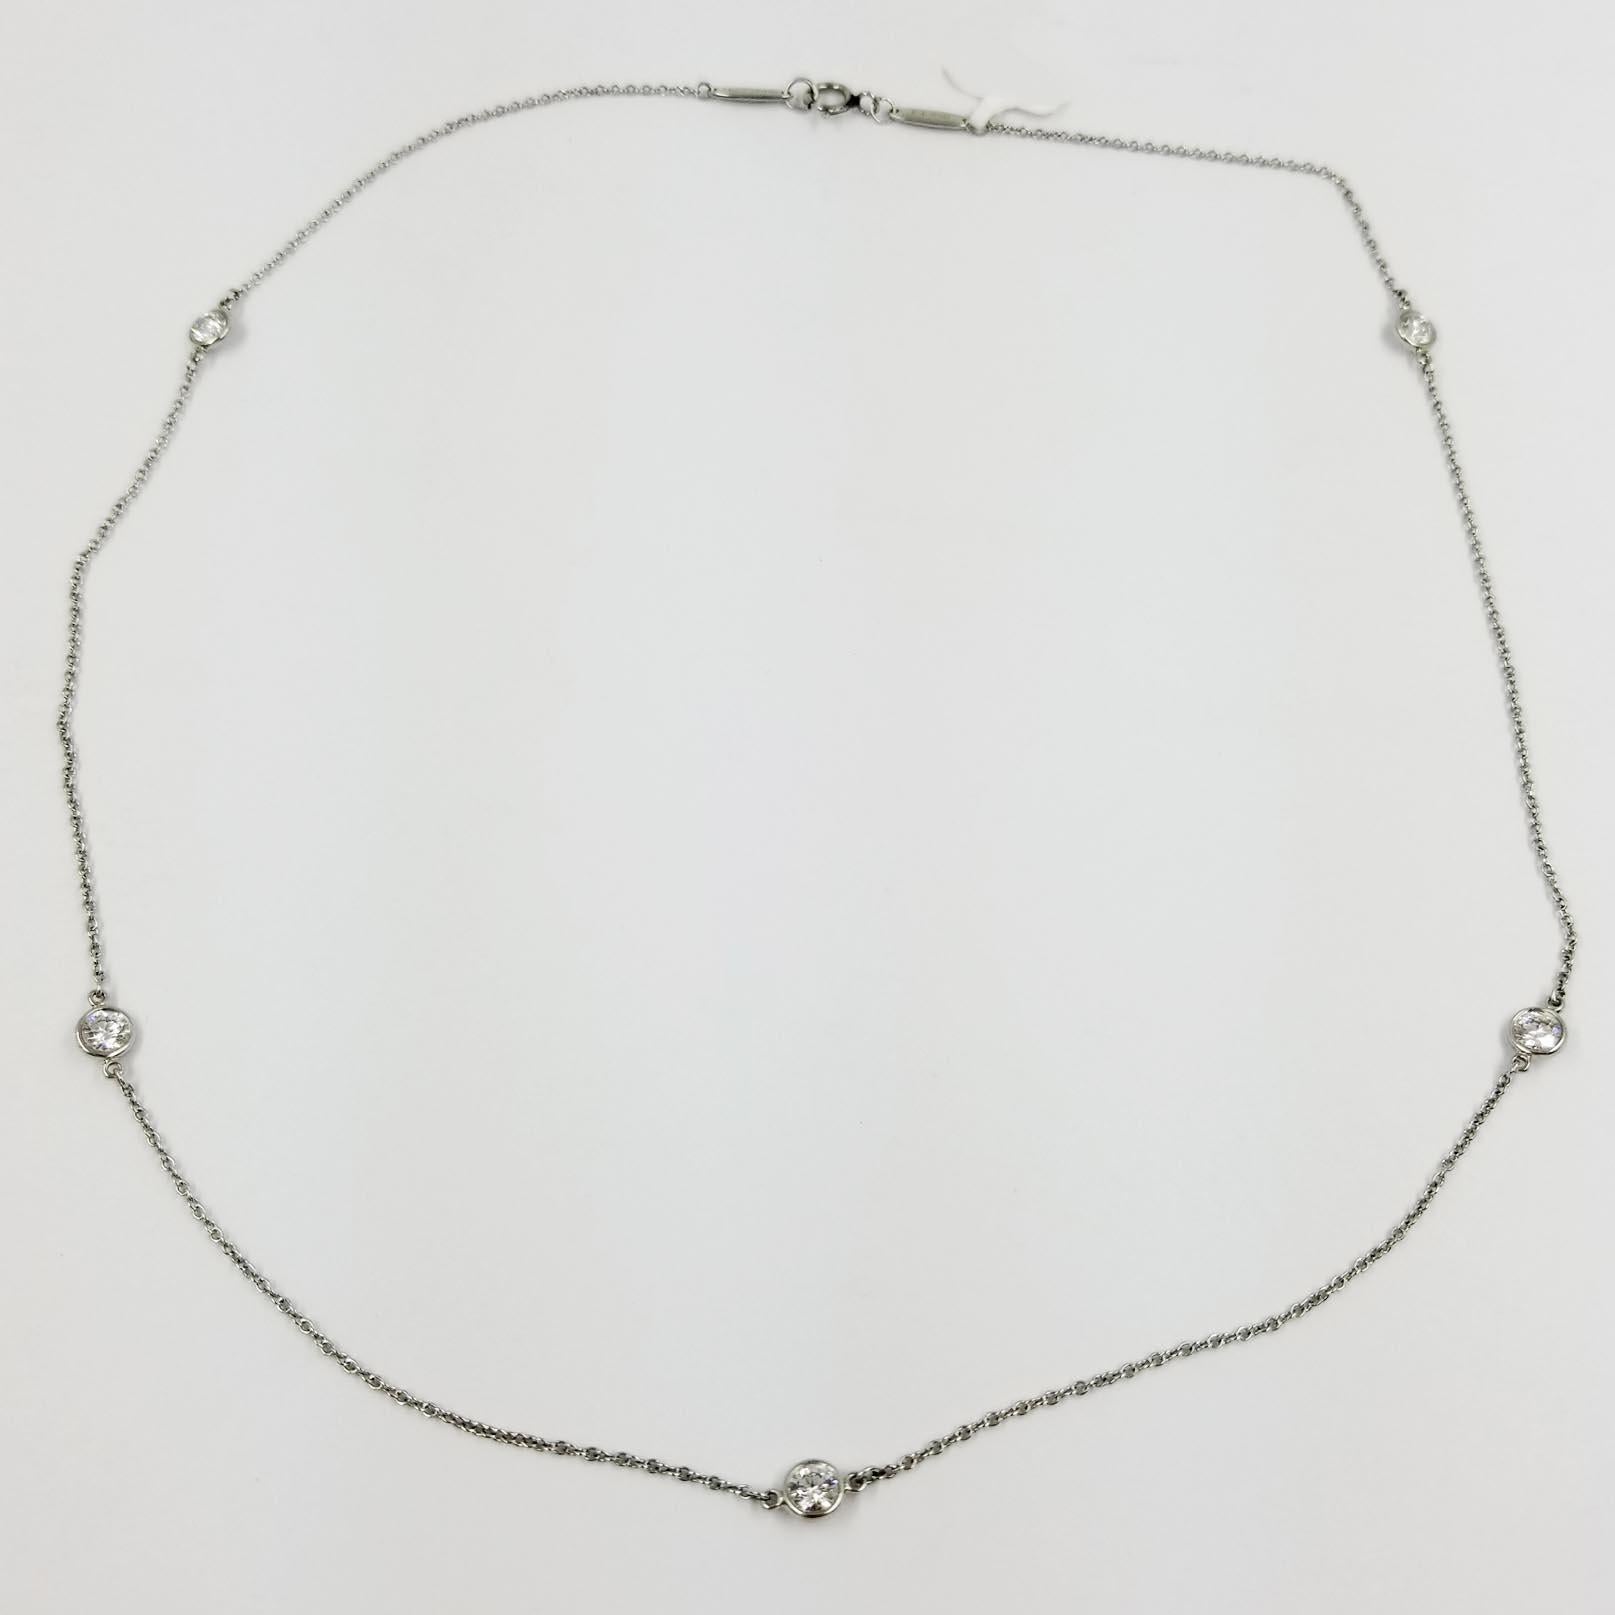 Co. Diamonds by the Inch Chain Necklace 